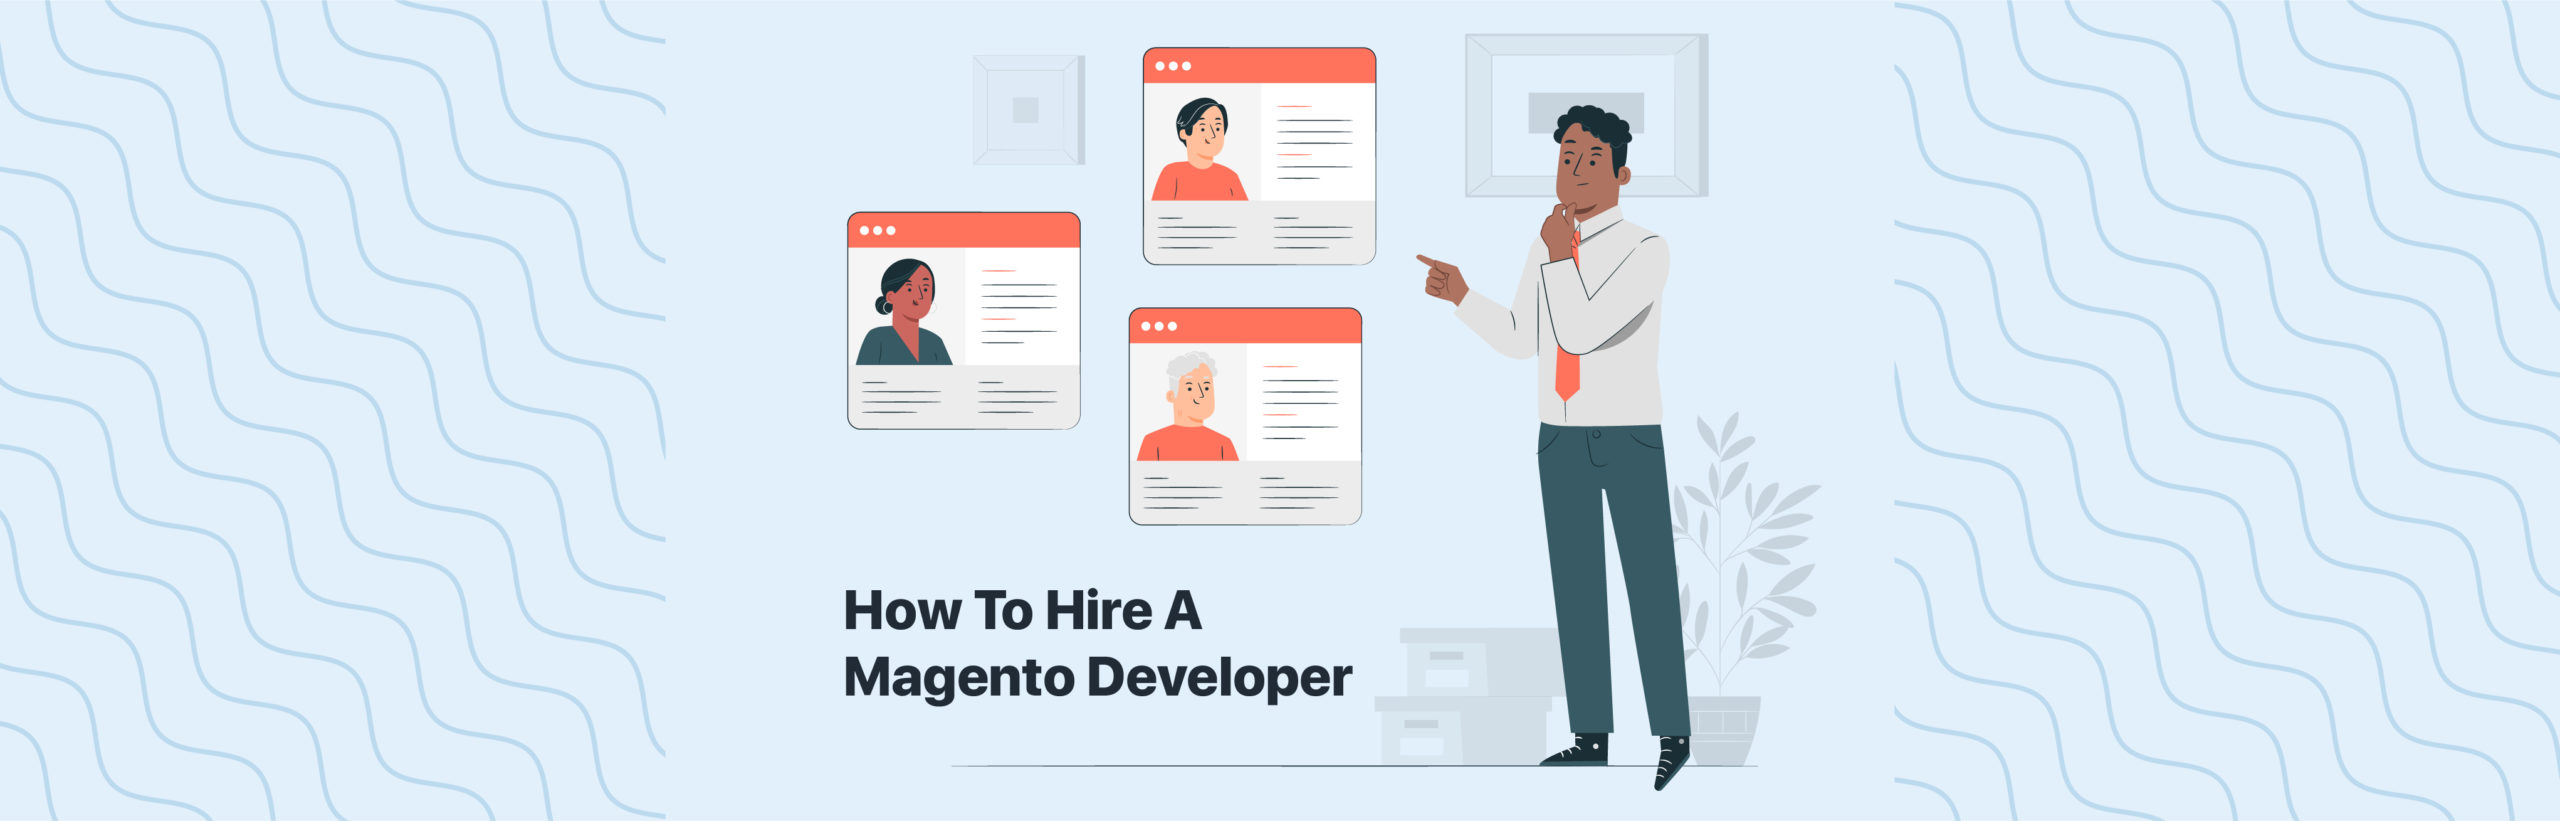 How To Hire Magento Developer— The Guide You’ll Never See Anywhere!